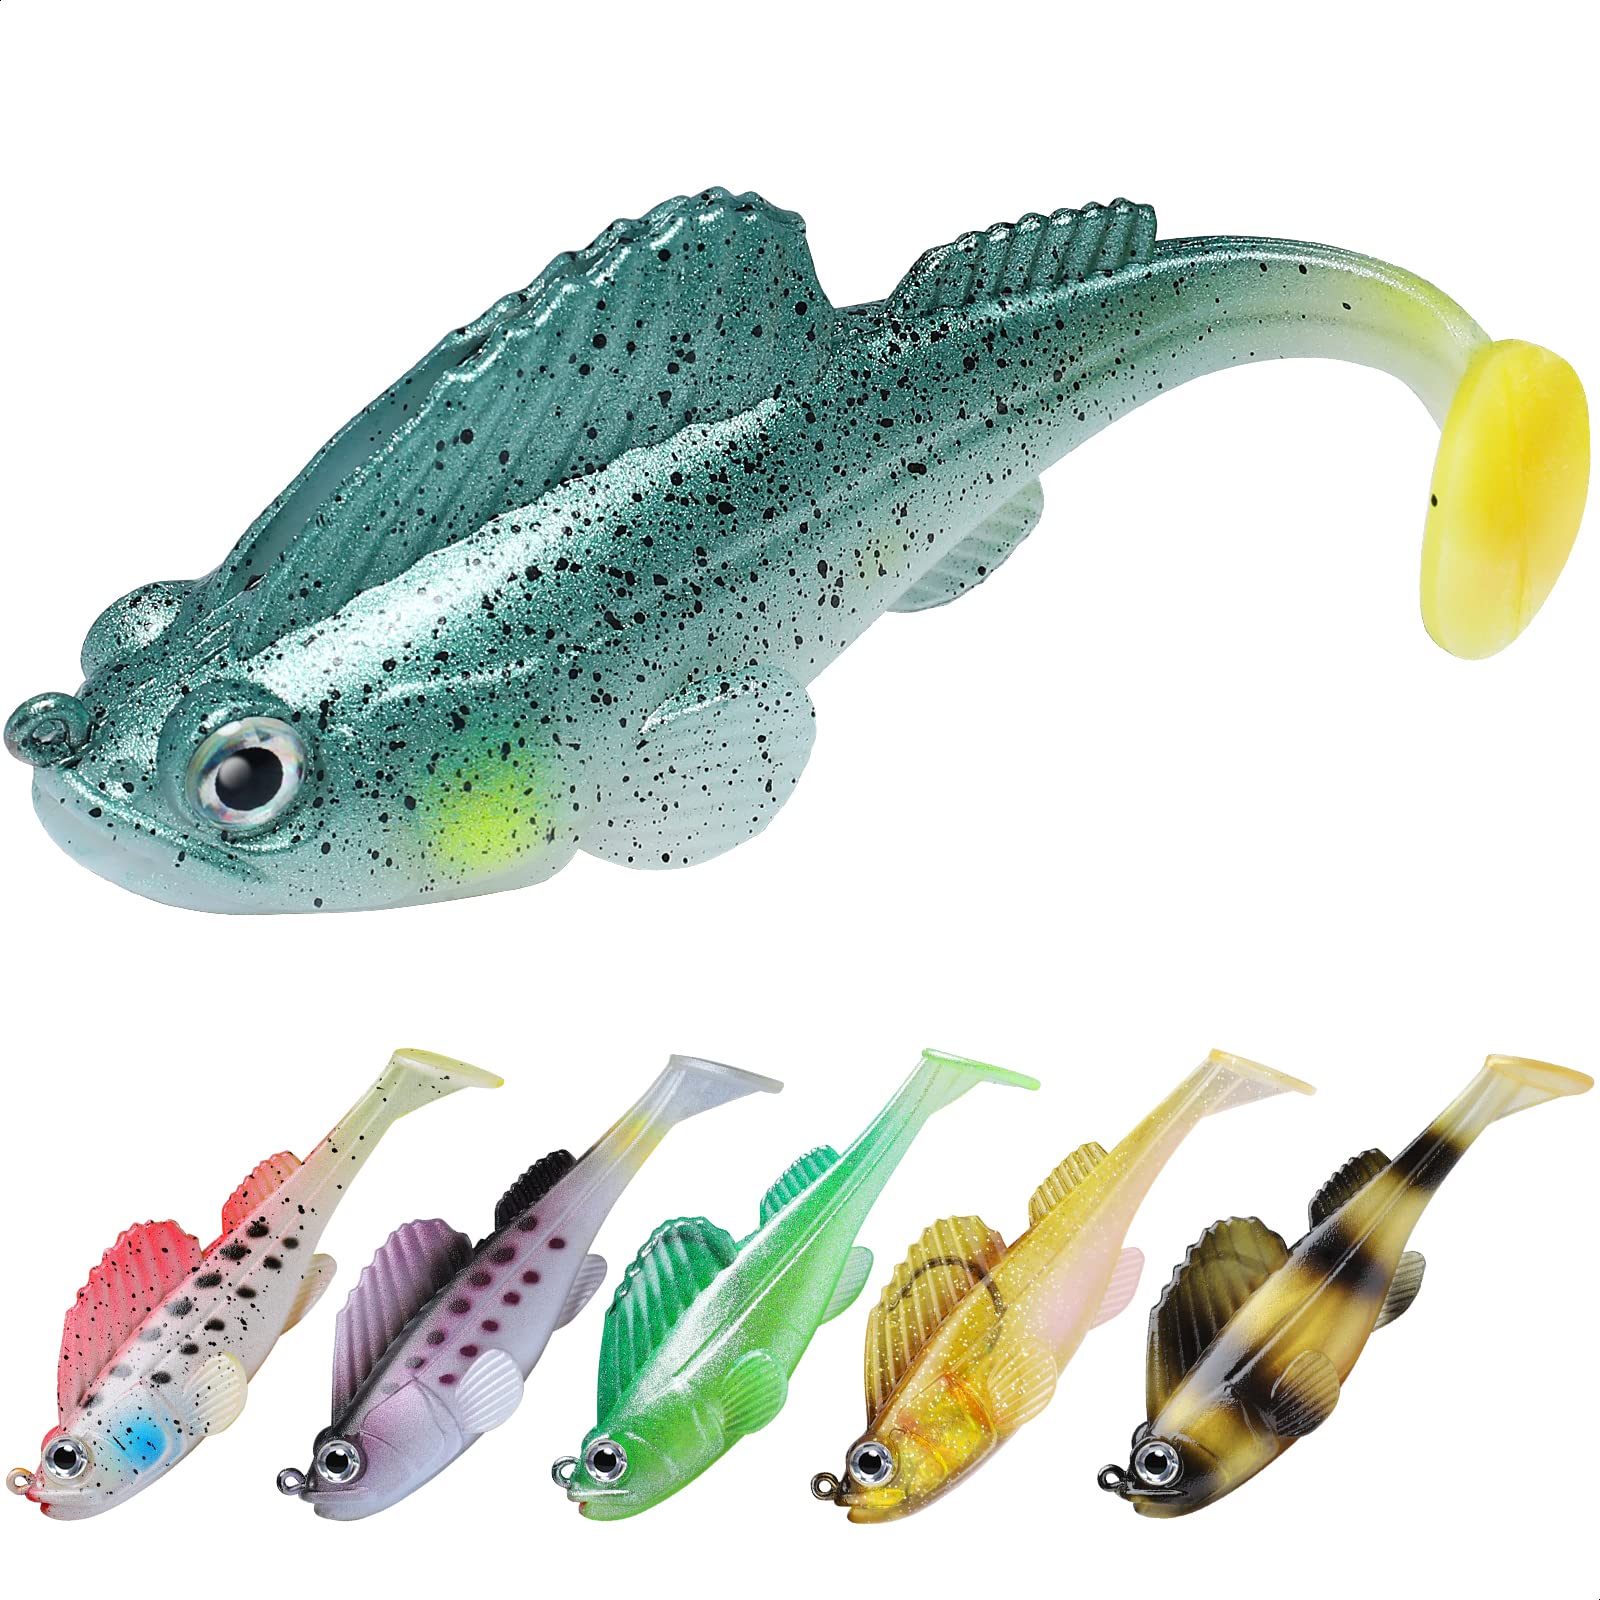 TRUSCEND Fishing Lures, Rigged Shrimp Lures for Saltwater Fishing, Weedless  Freshwater Fishing Lure for Bass Trout Pike, Fishing Baits with Spinner,  Grubtail or Paddle Tail, Soft Plastic Lures -  Canada